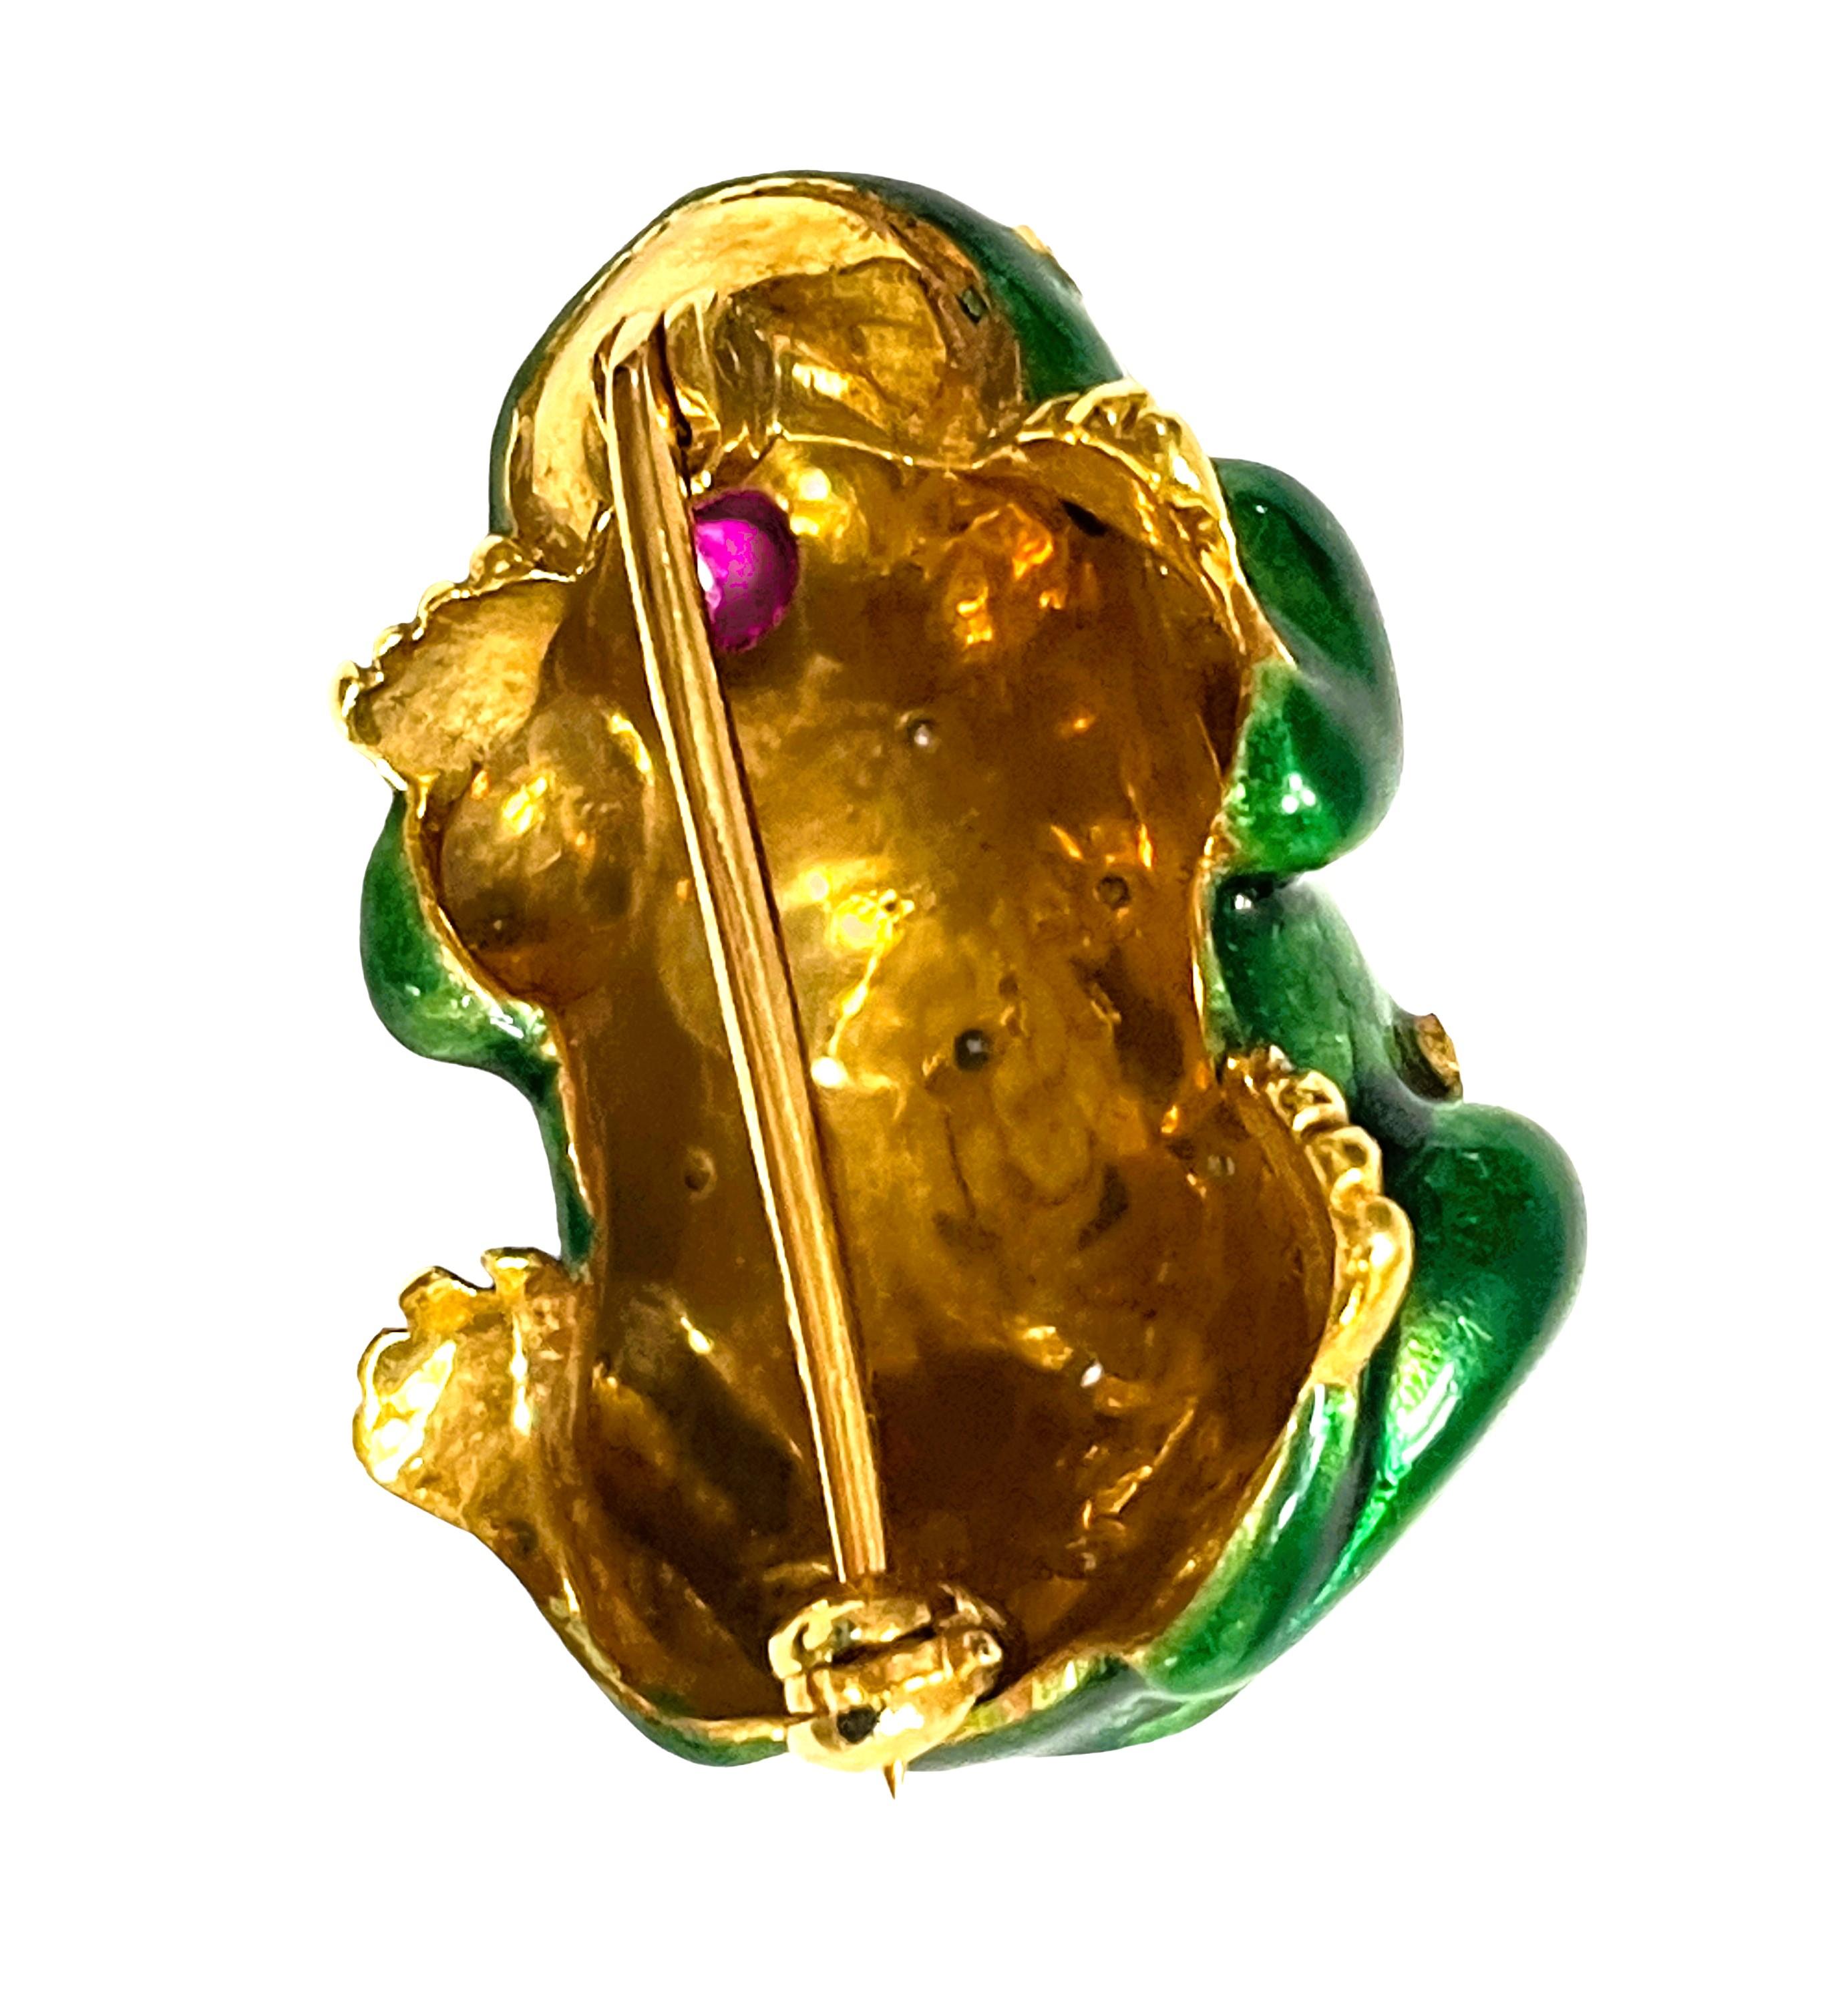 Handmade 21k Yellow Gold Enamel Frog Pin/Pedant with Ruby Eyes and Diamond Bumps 3